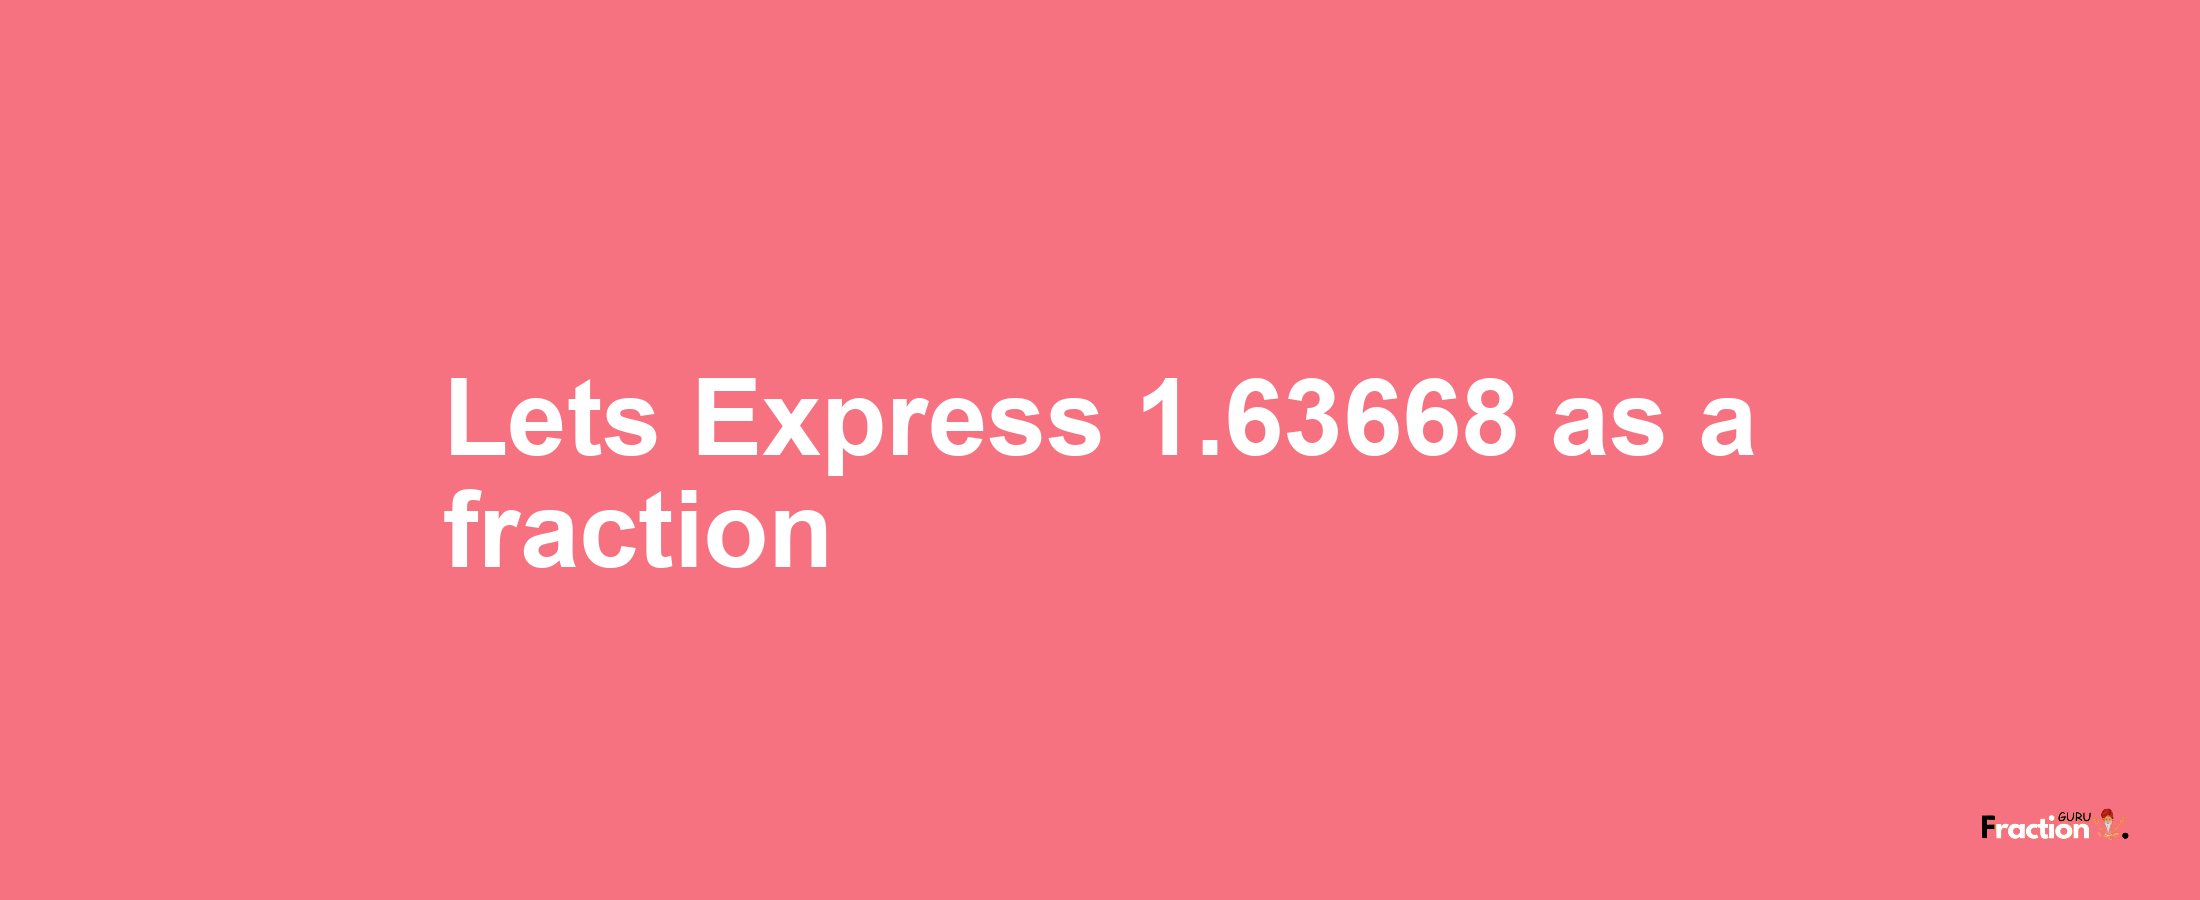 Lets Express 1.63668 as afraction